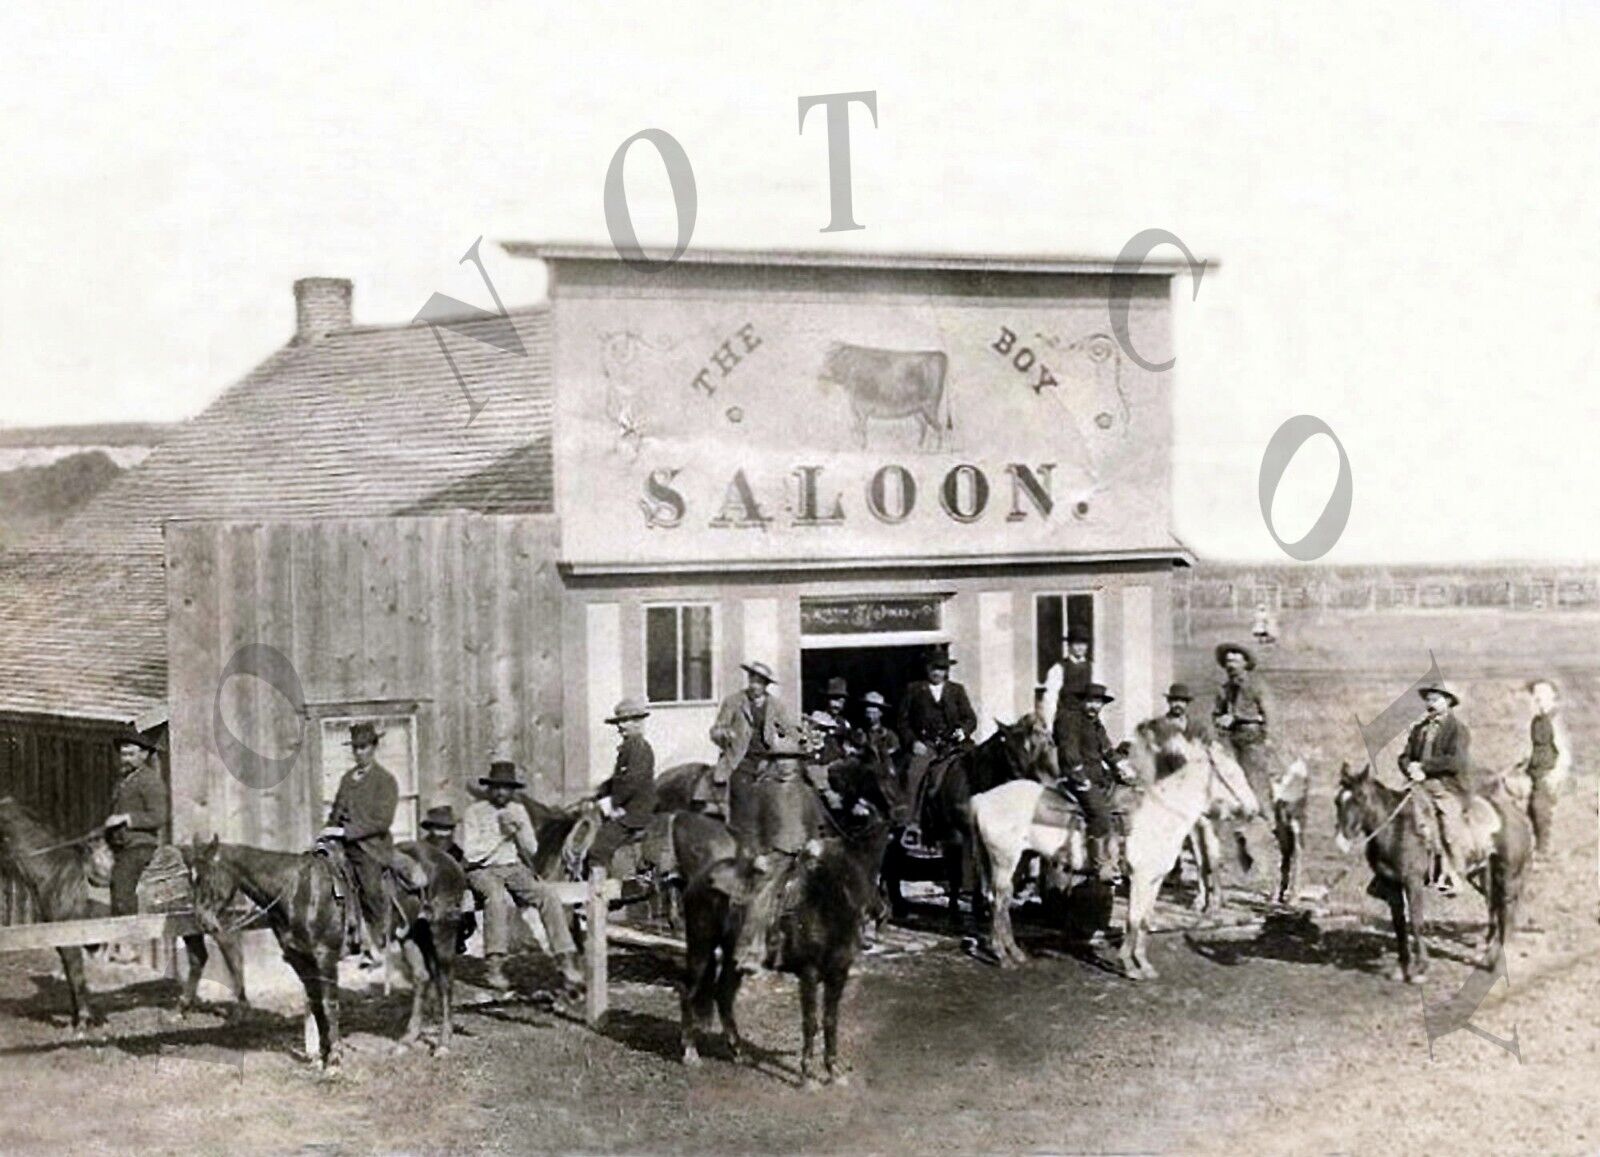 ANTIQUE OLD WEST REPRO PHOTO PRINT OF THE COWBOY SALOON ROSEBUD MONTANA 1883